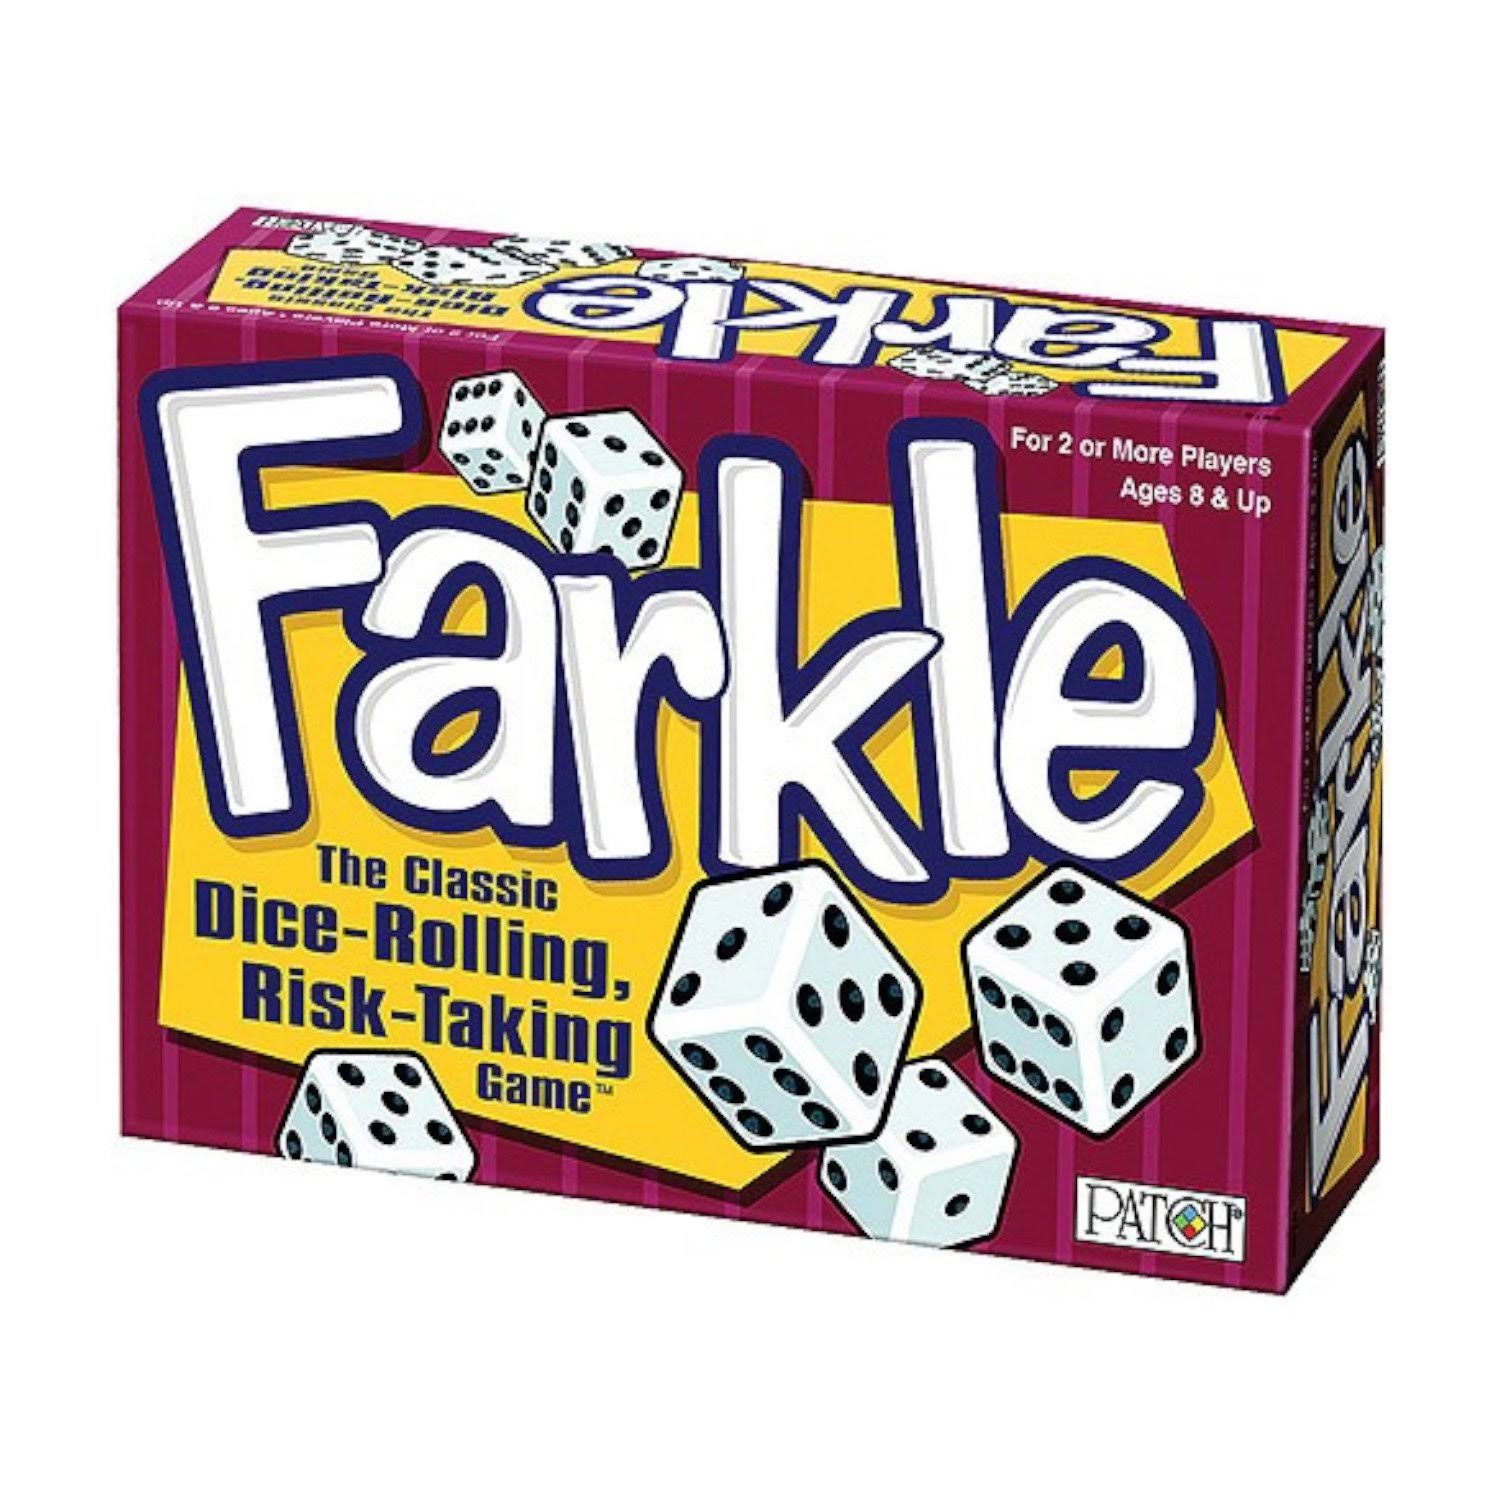 Patch Farkle The Classic Dice-Rolling, Risk Taking Game